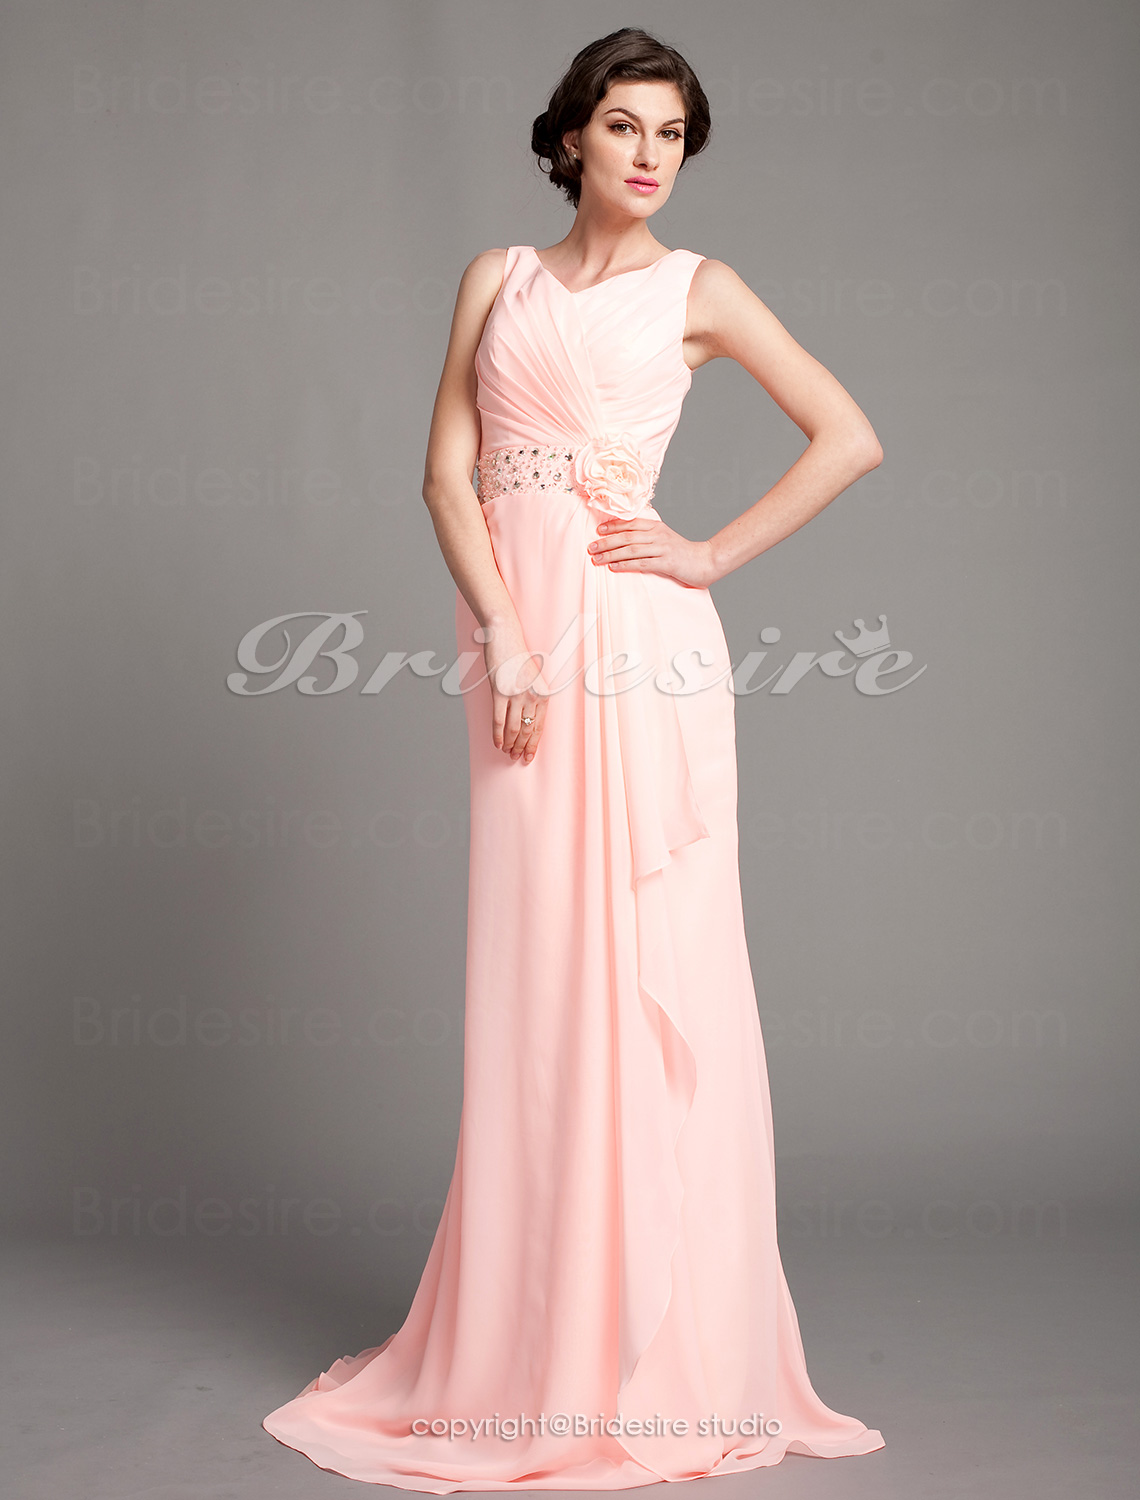 A-line Chiffon Sweep/ Brush Train V-neck Mother of the Bride Dress